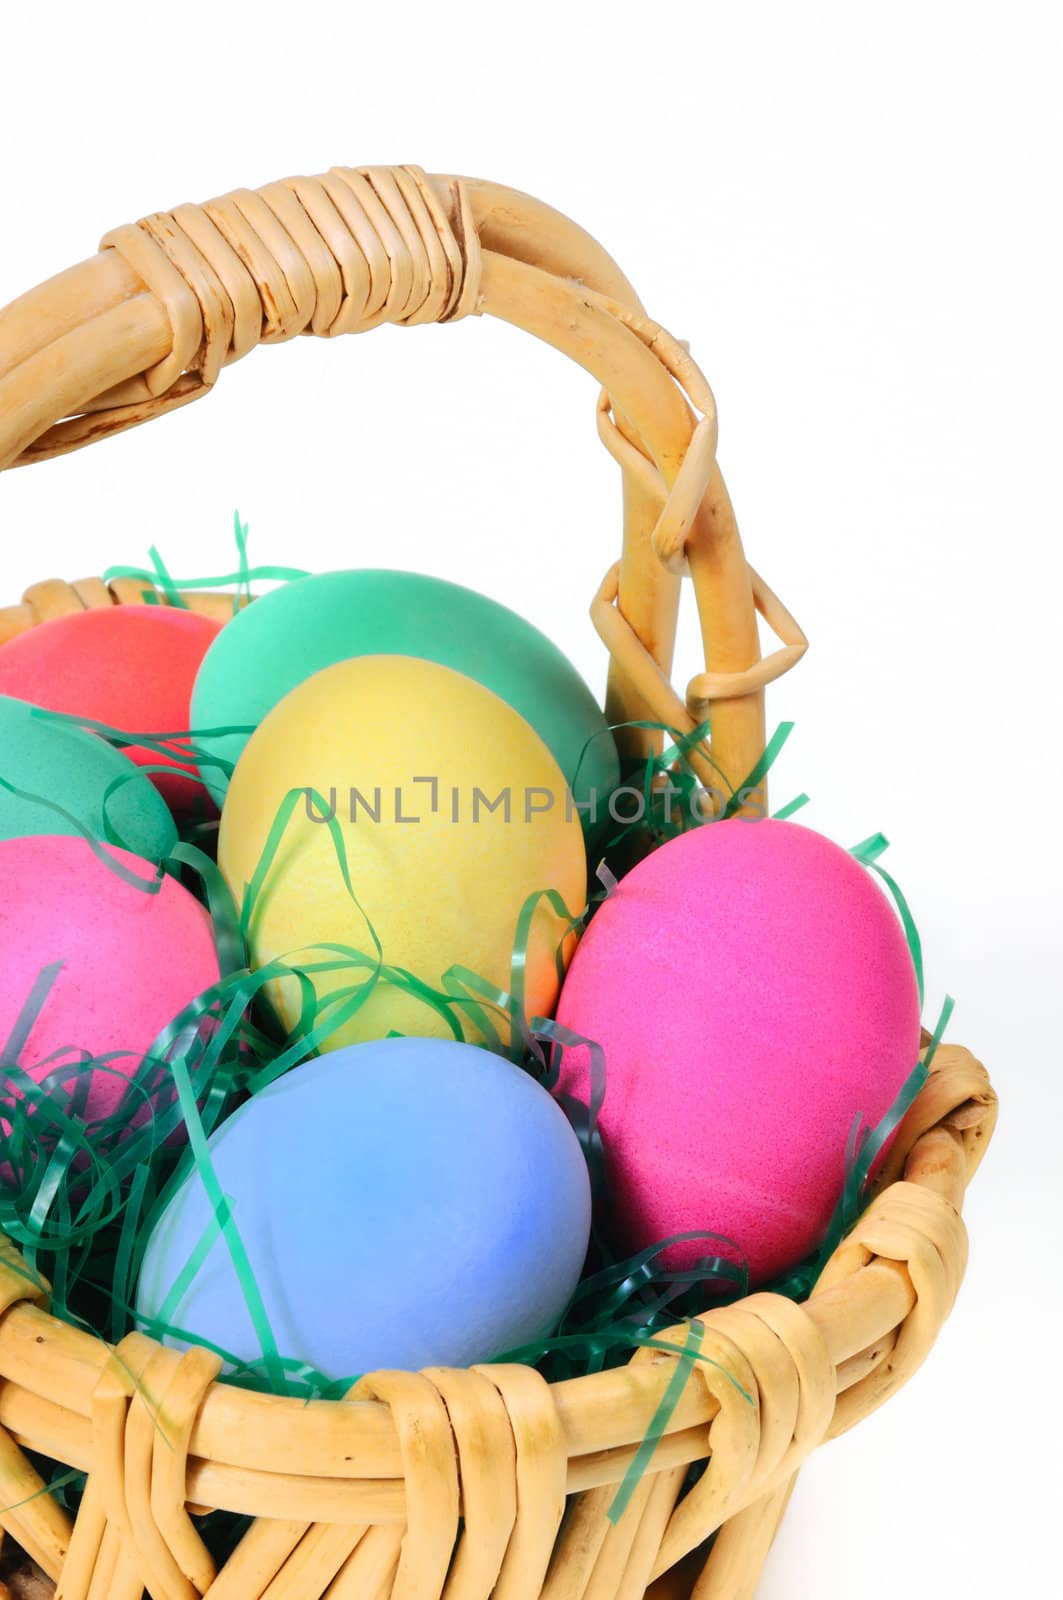 Easter colored eggs in the basket on the white background 